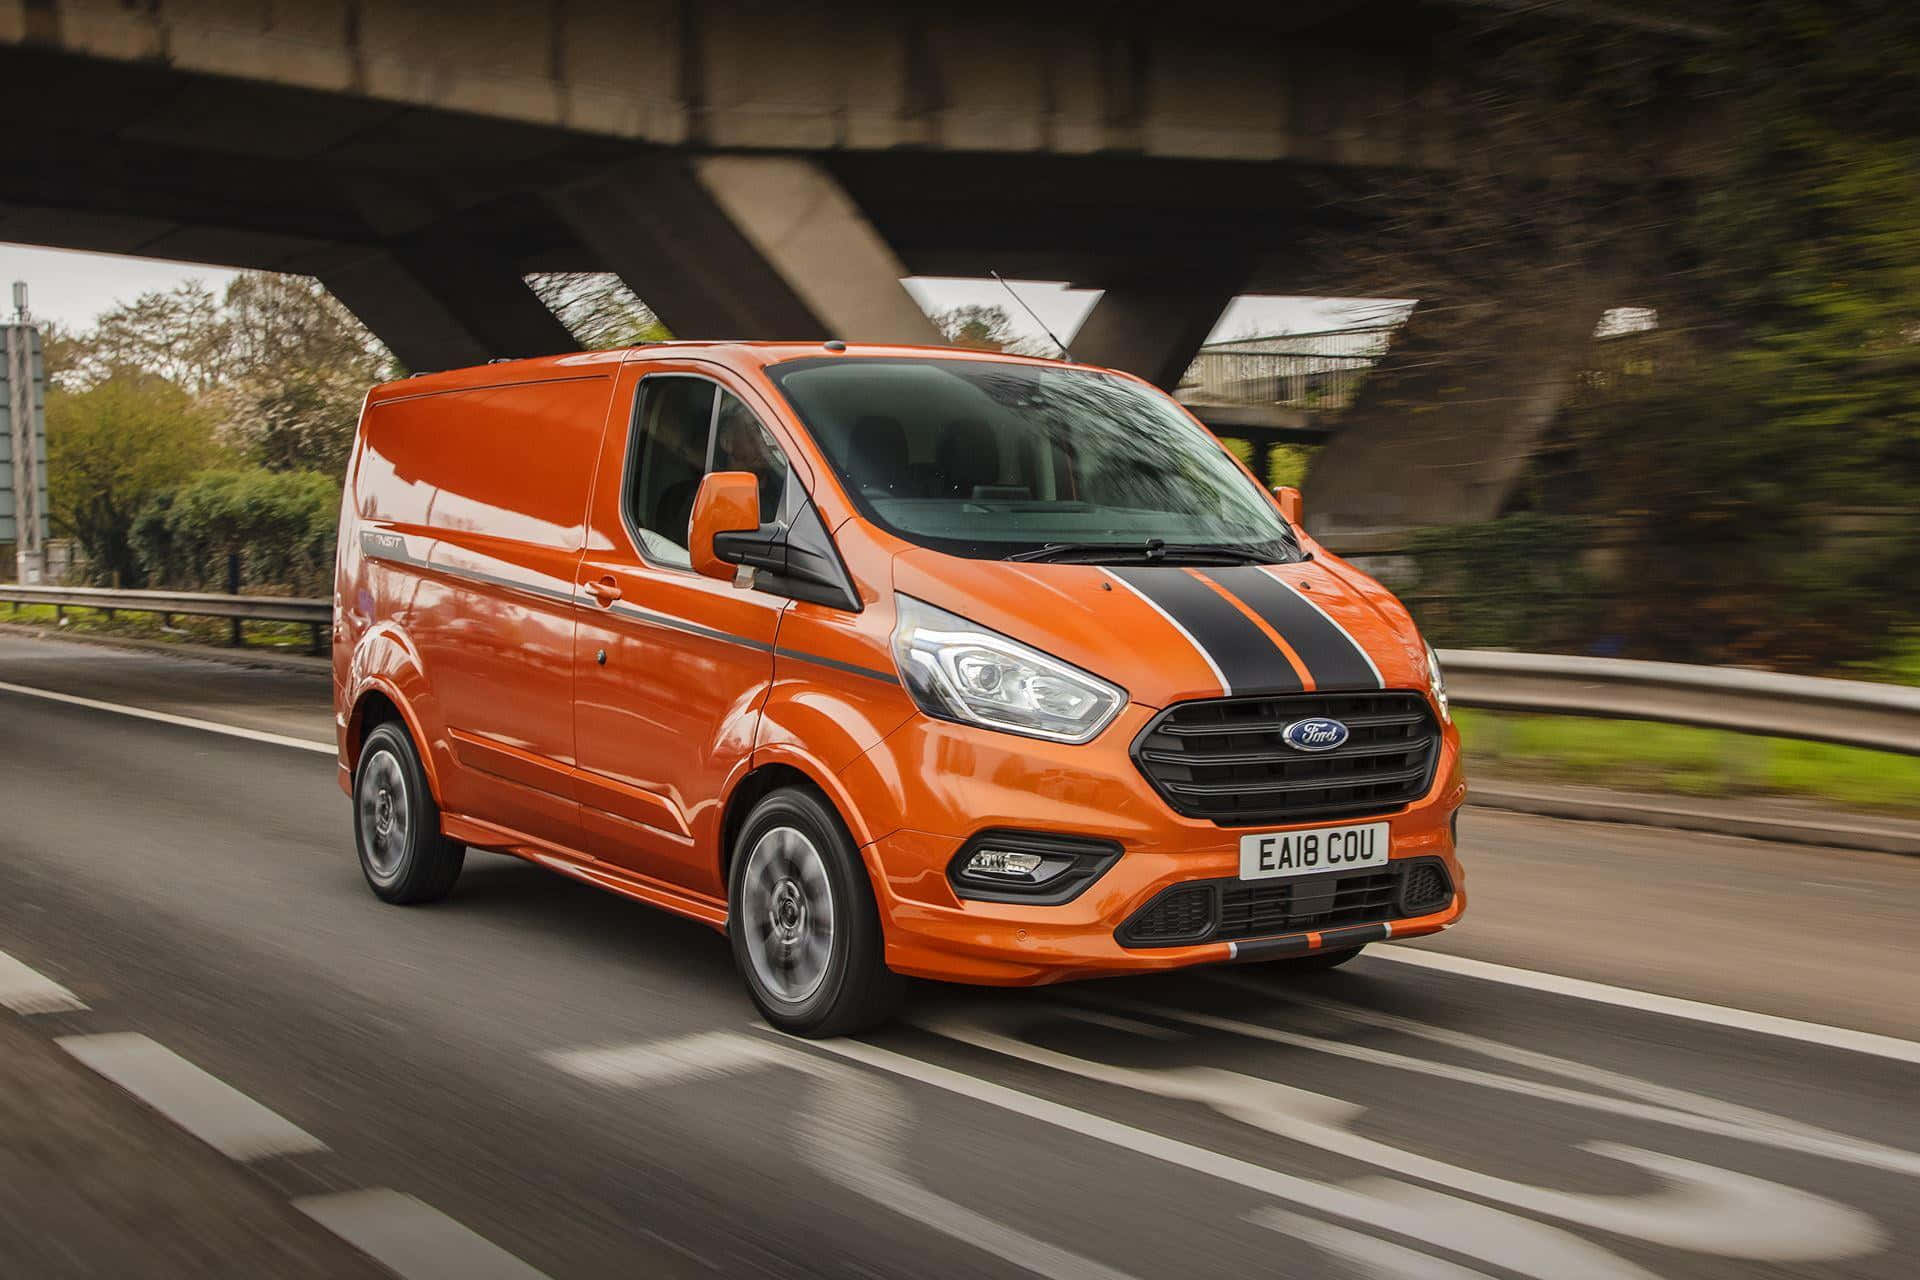 Sleek Ford Transit confidently cruising on a scenic road Wallpaper